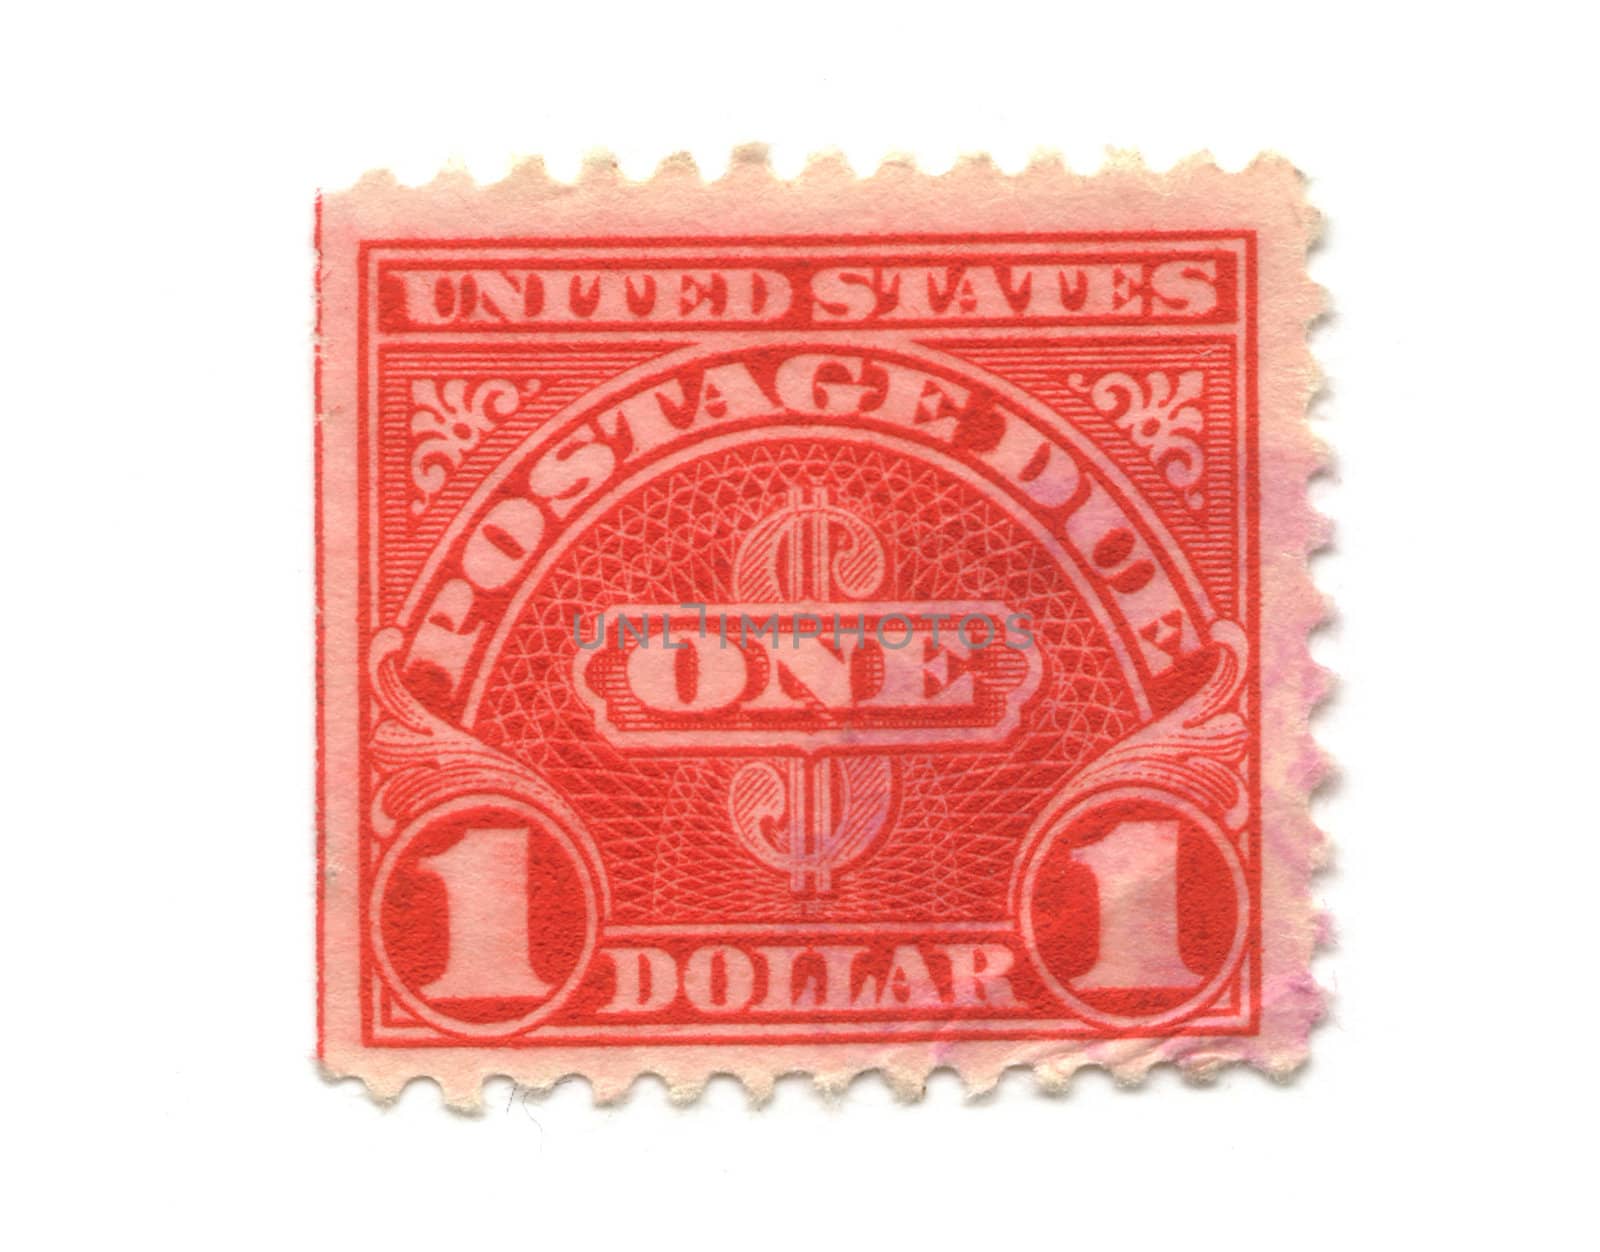 Old postage stamps from USA one Dollar (Due)